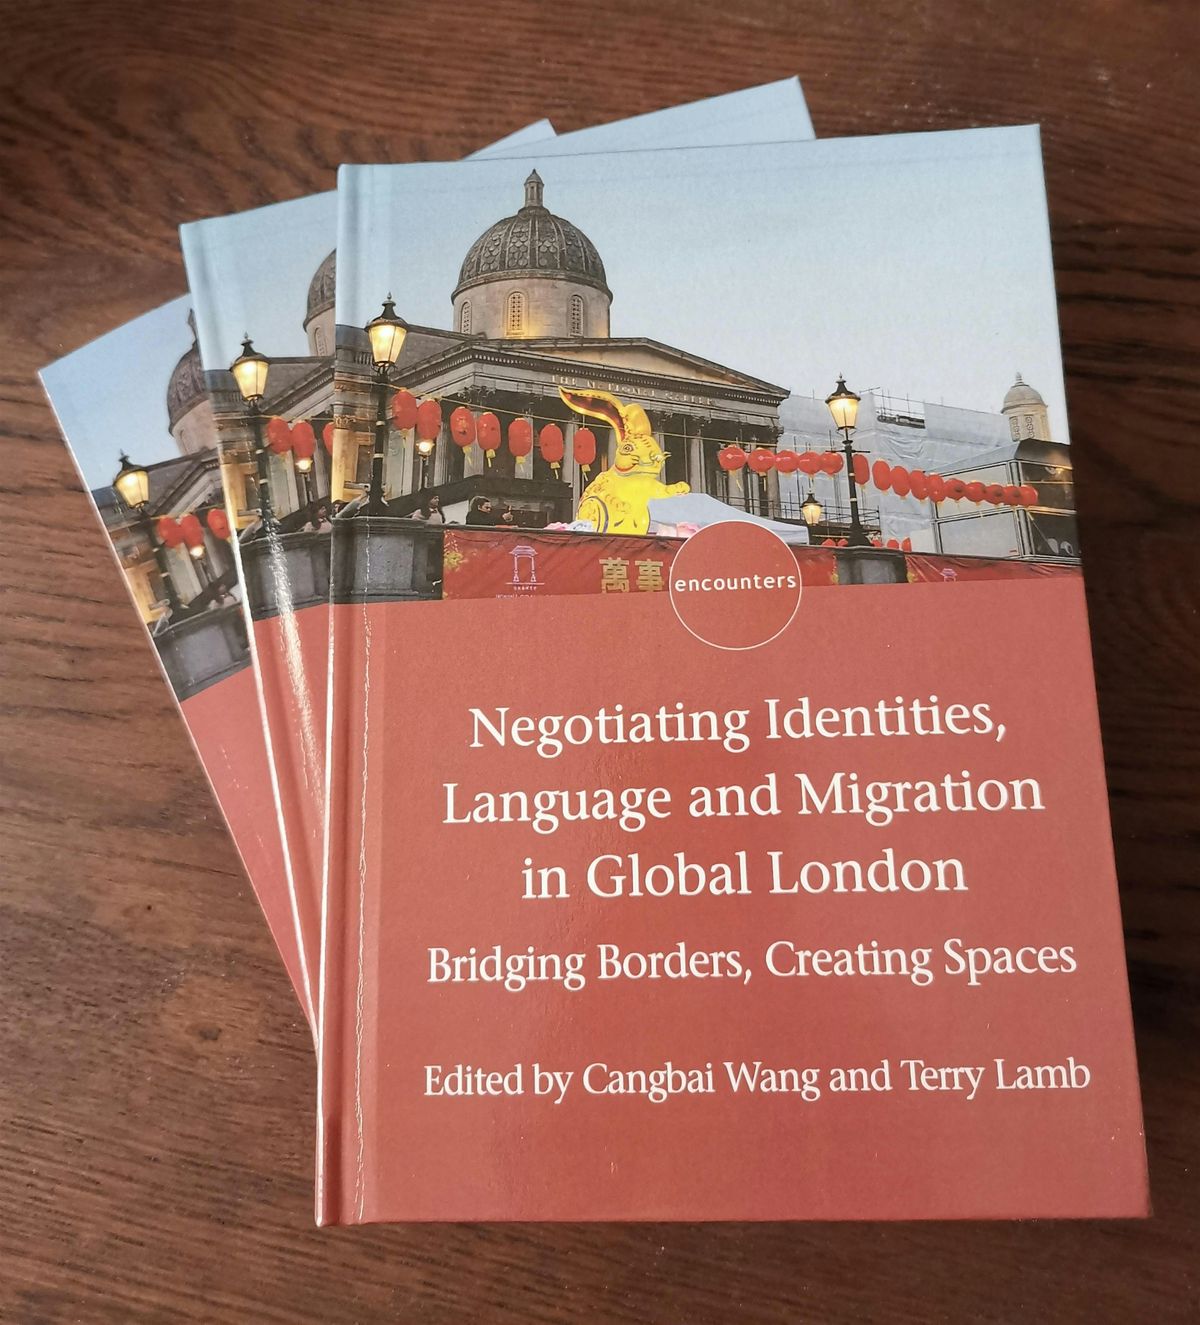 Book Talk: Negotiating Identities, Language and Migration in Global London